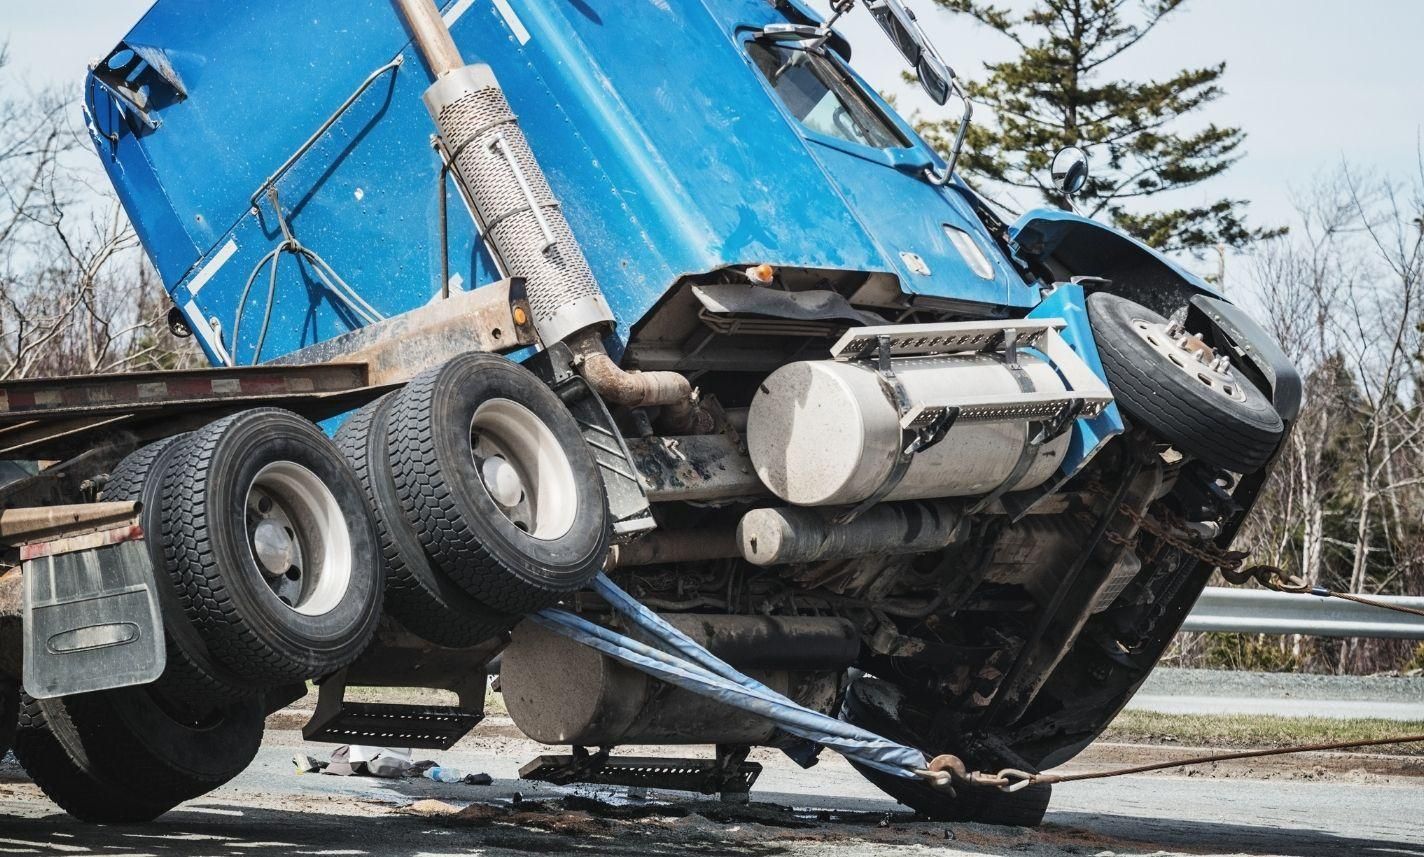 fairmount-commercial-truck-accident-injury-lawyer